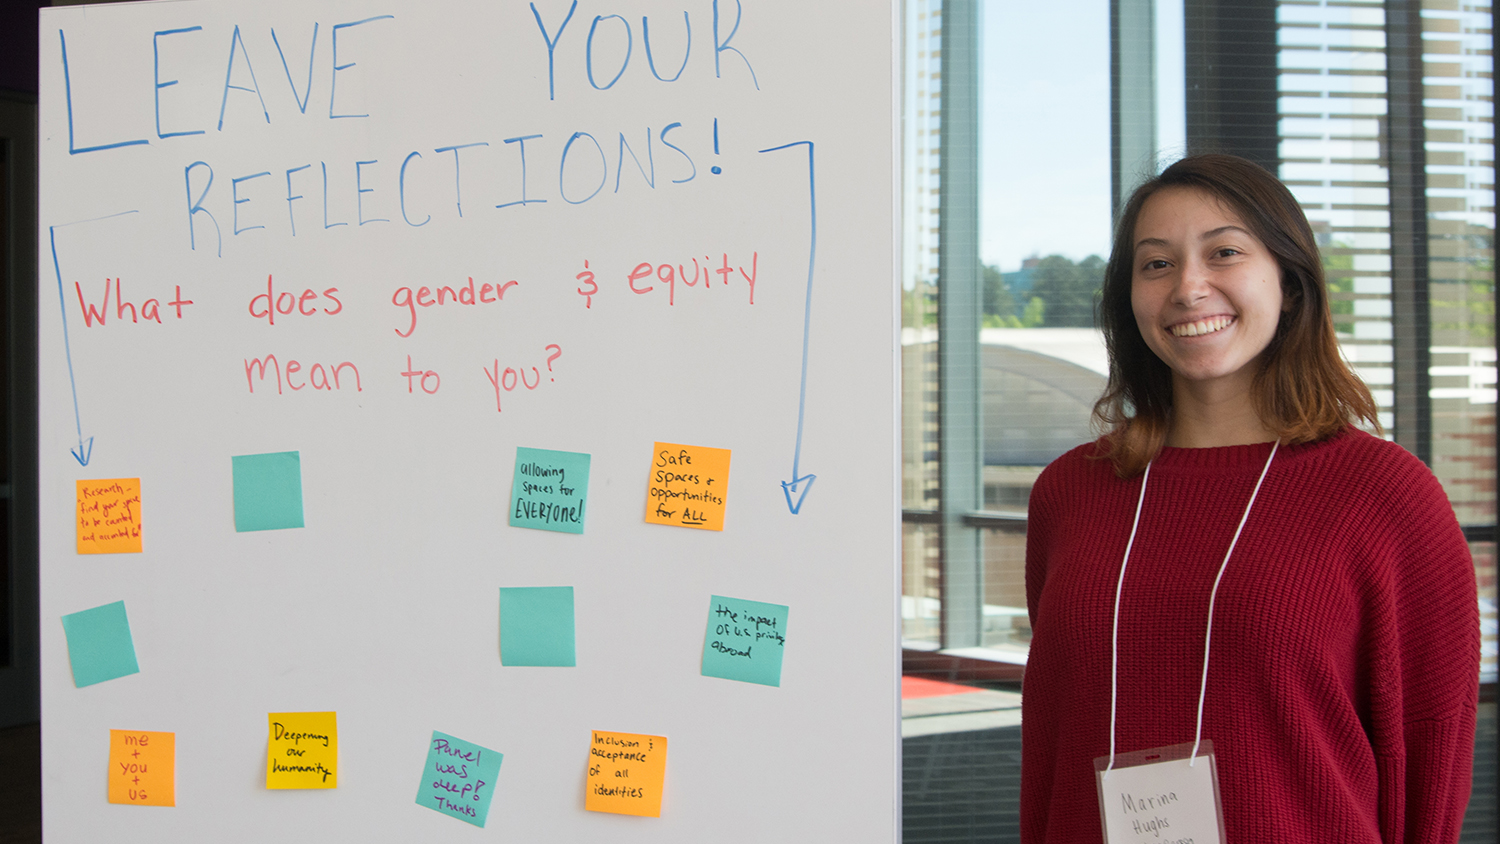 Reflection board at Gender and Equity Research Symposium